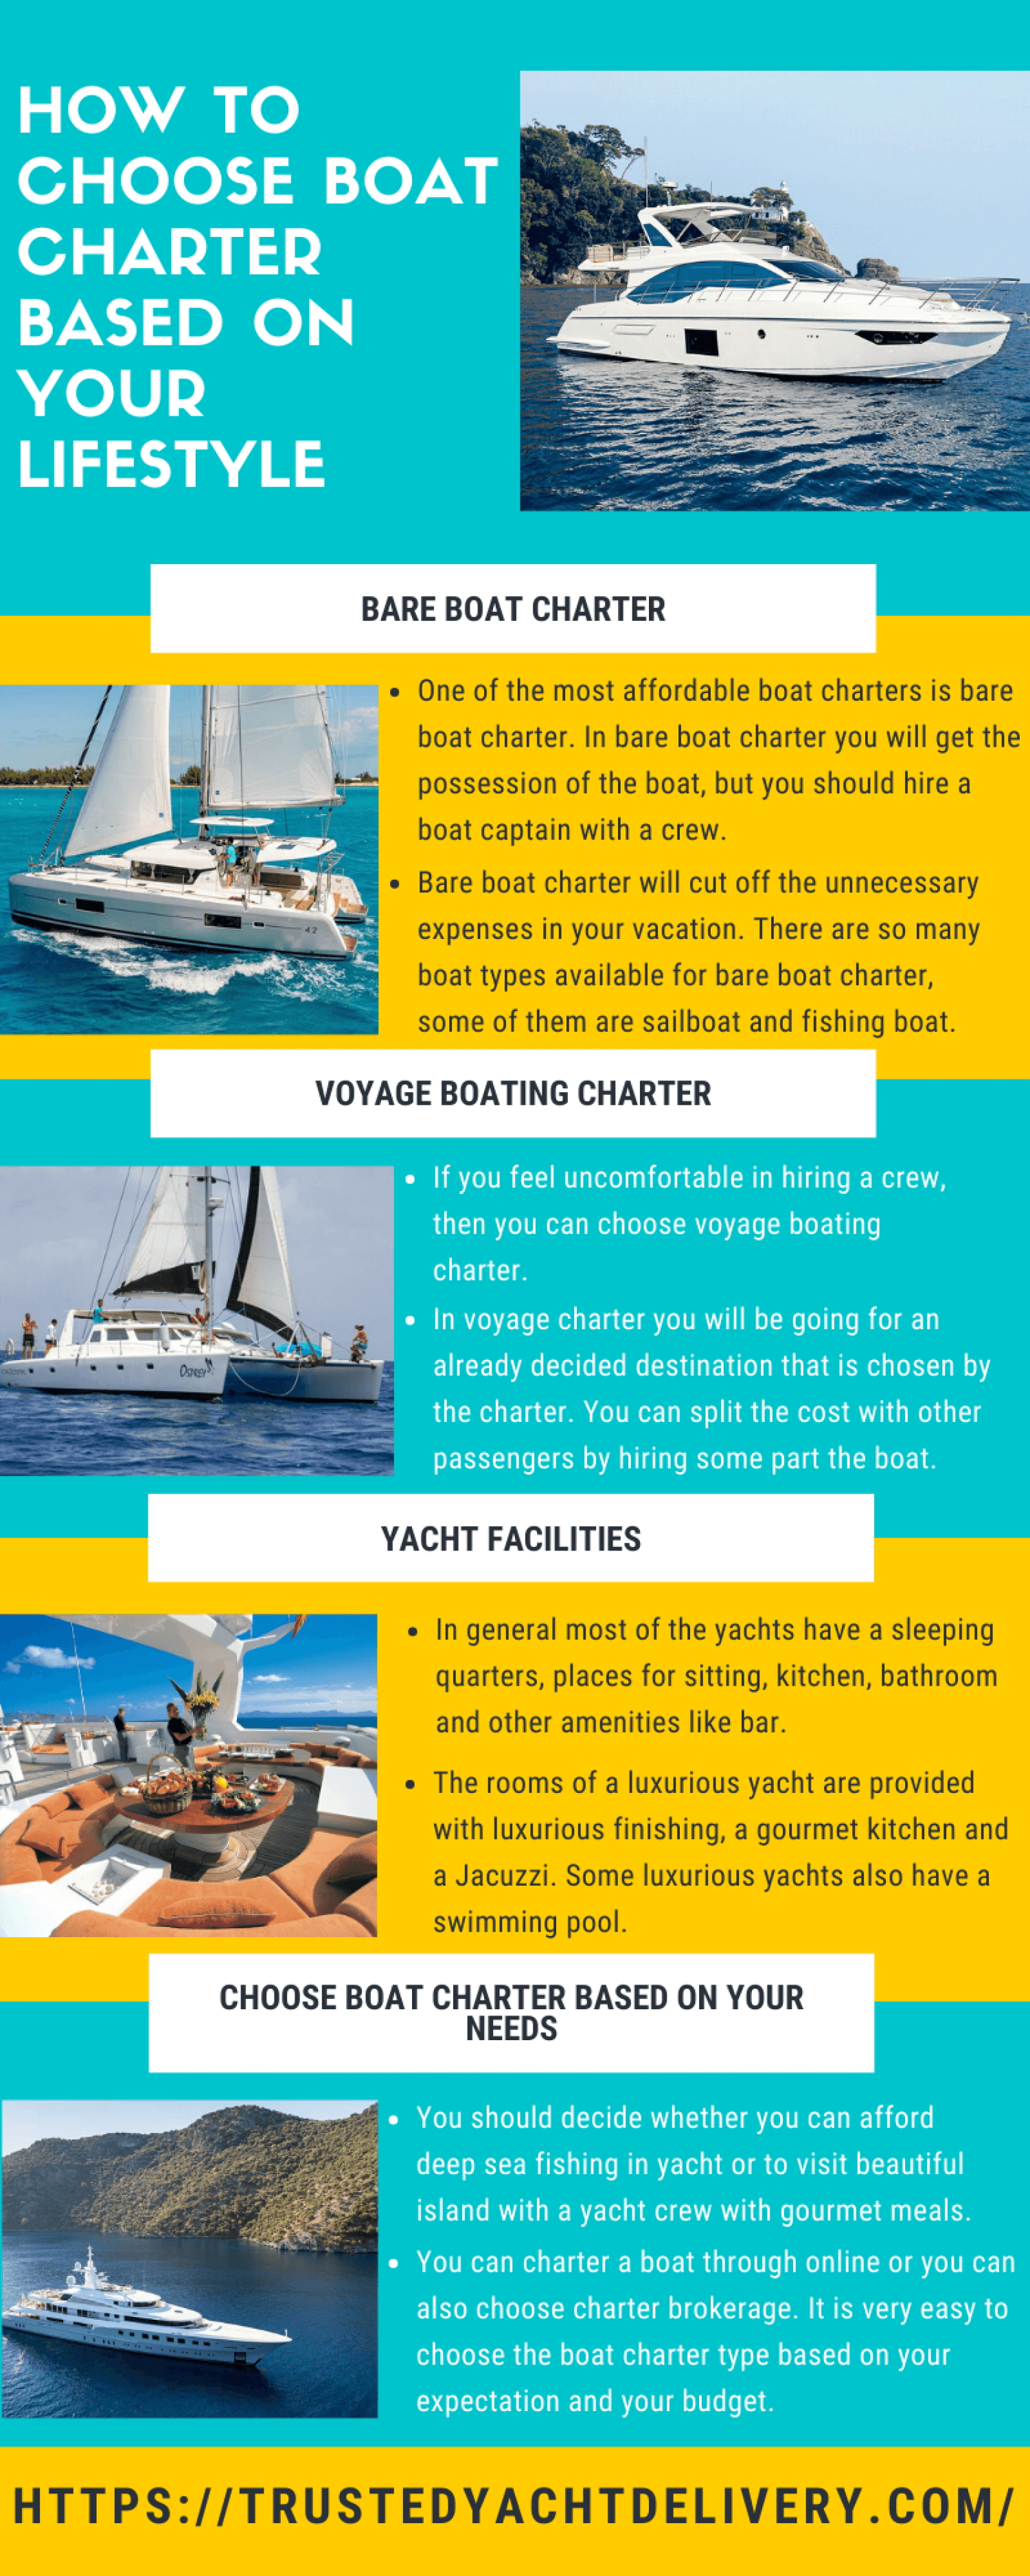 How to choose Boat charter based on your lifestyle